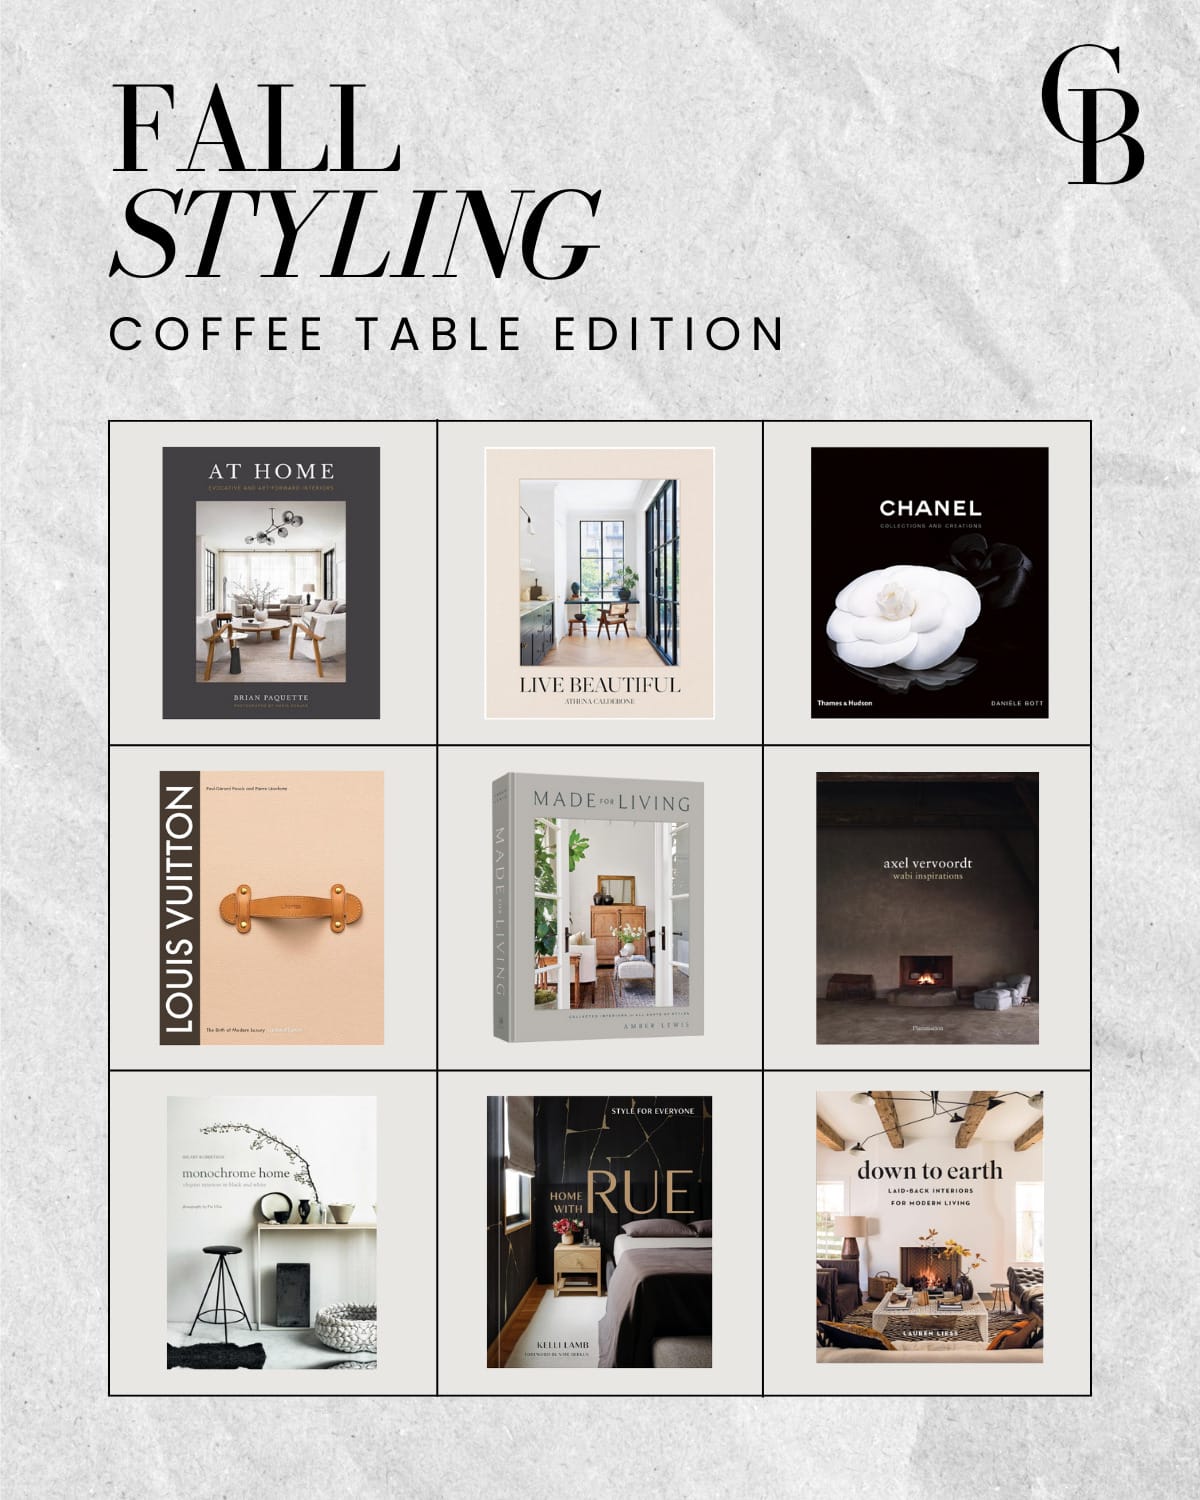 Coffee Table Styling | Fall Edition | #coffeetable #styling #fall #edition #books #decor #homedecor #athome #hardcover #reading